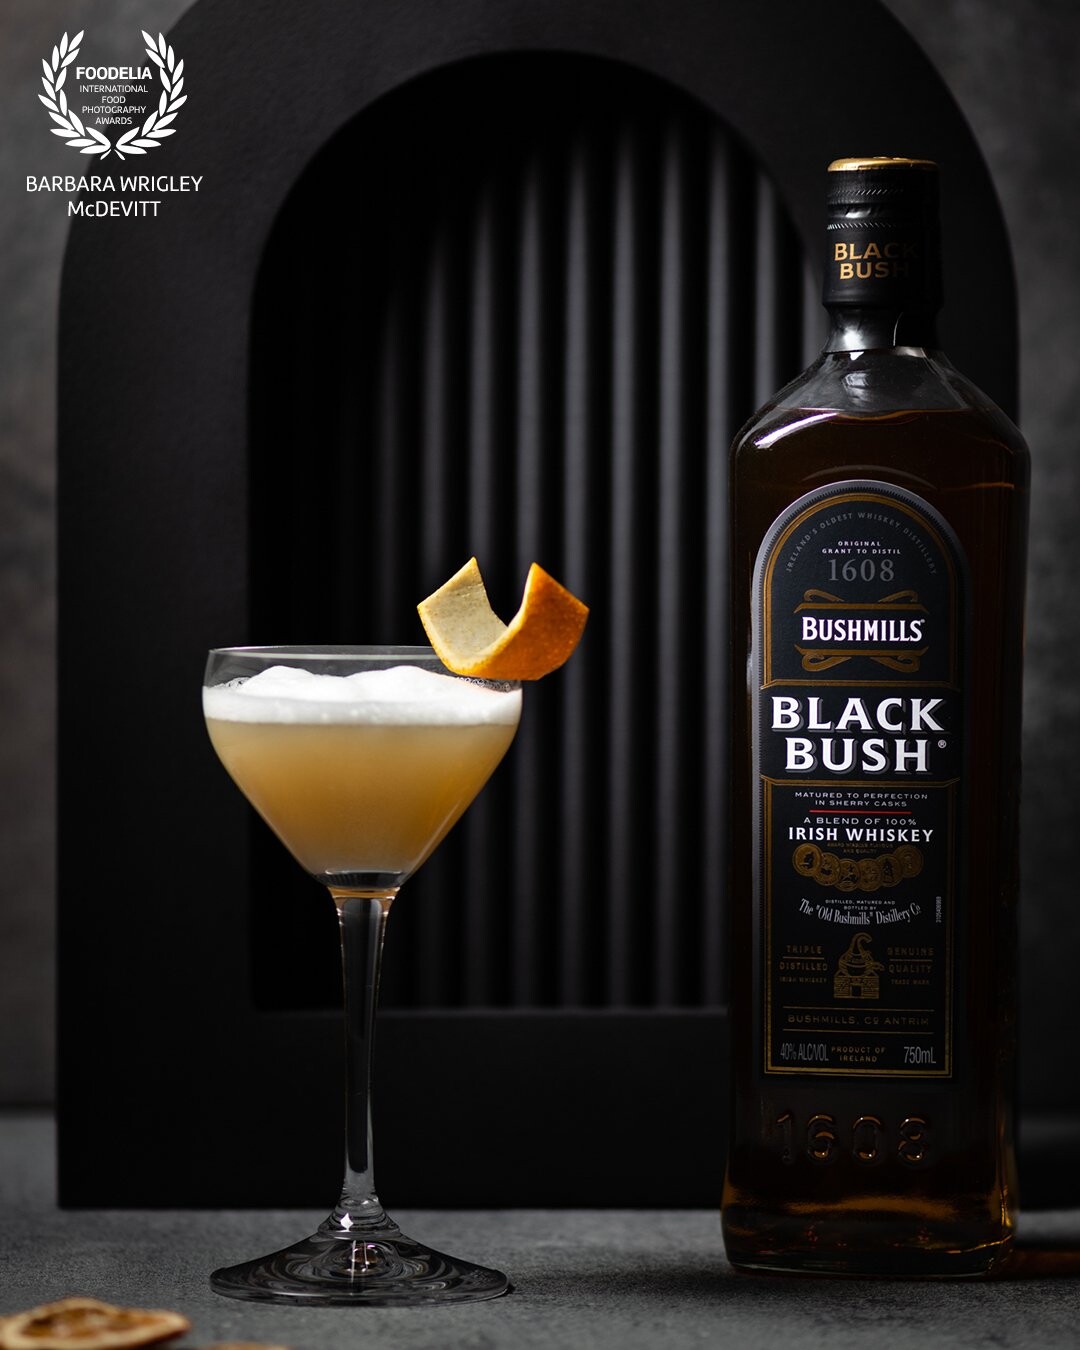 I wanted to display this cocktail and the Bushmills in a unique way.  I selected a grey textured background and used black geometric shapes to give the image dimension without distracting from the cocktail.  I also focused the light on the upper portion of the drink and the Bushmills label to draw the focus to the cocktail and to recess the geometric shapes into the background.